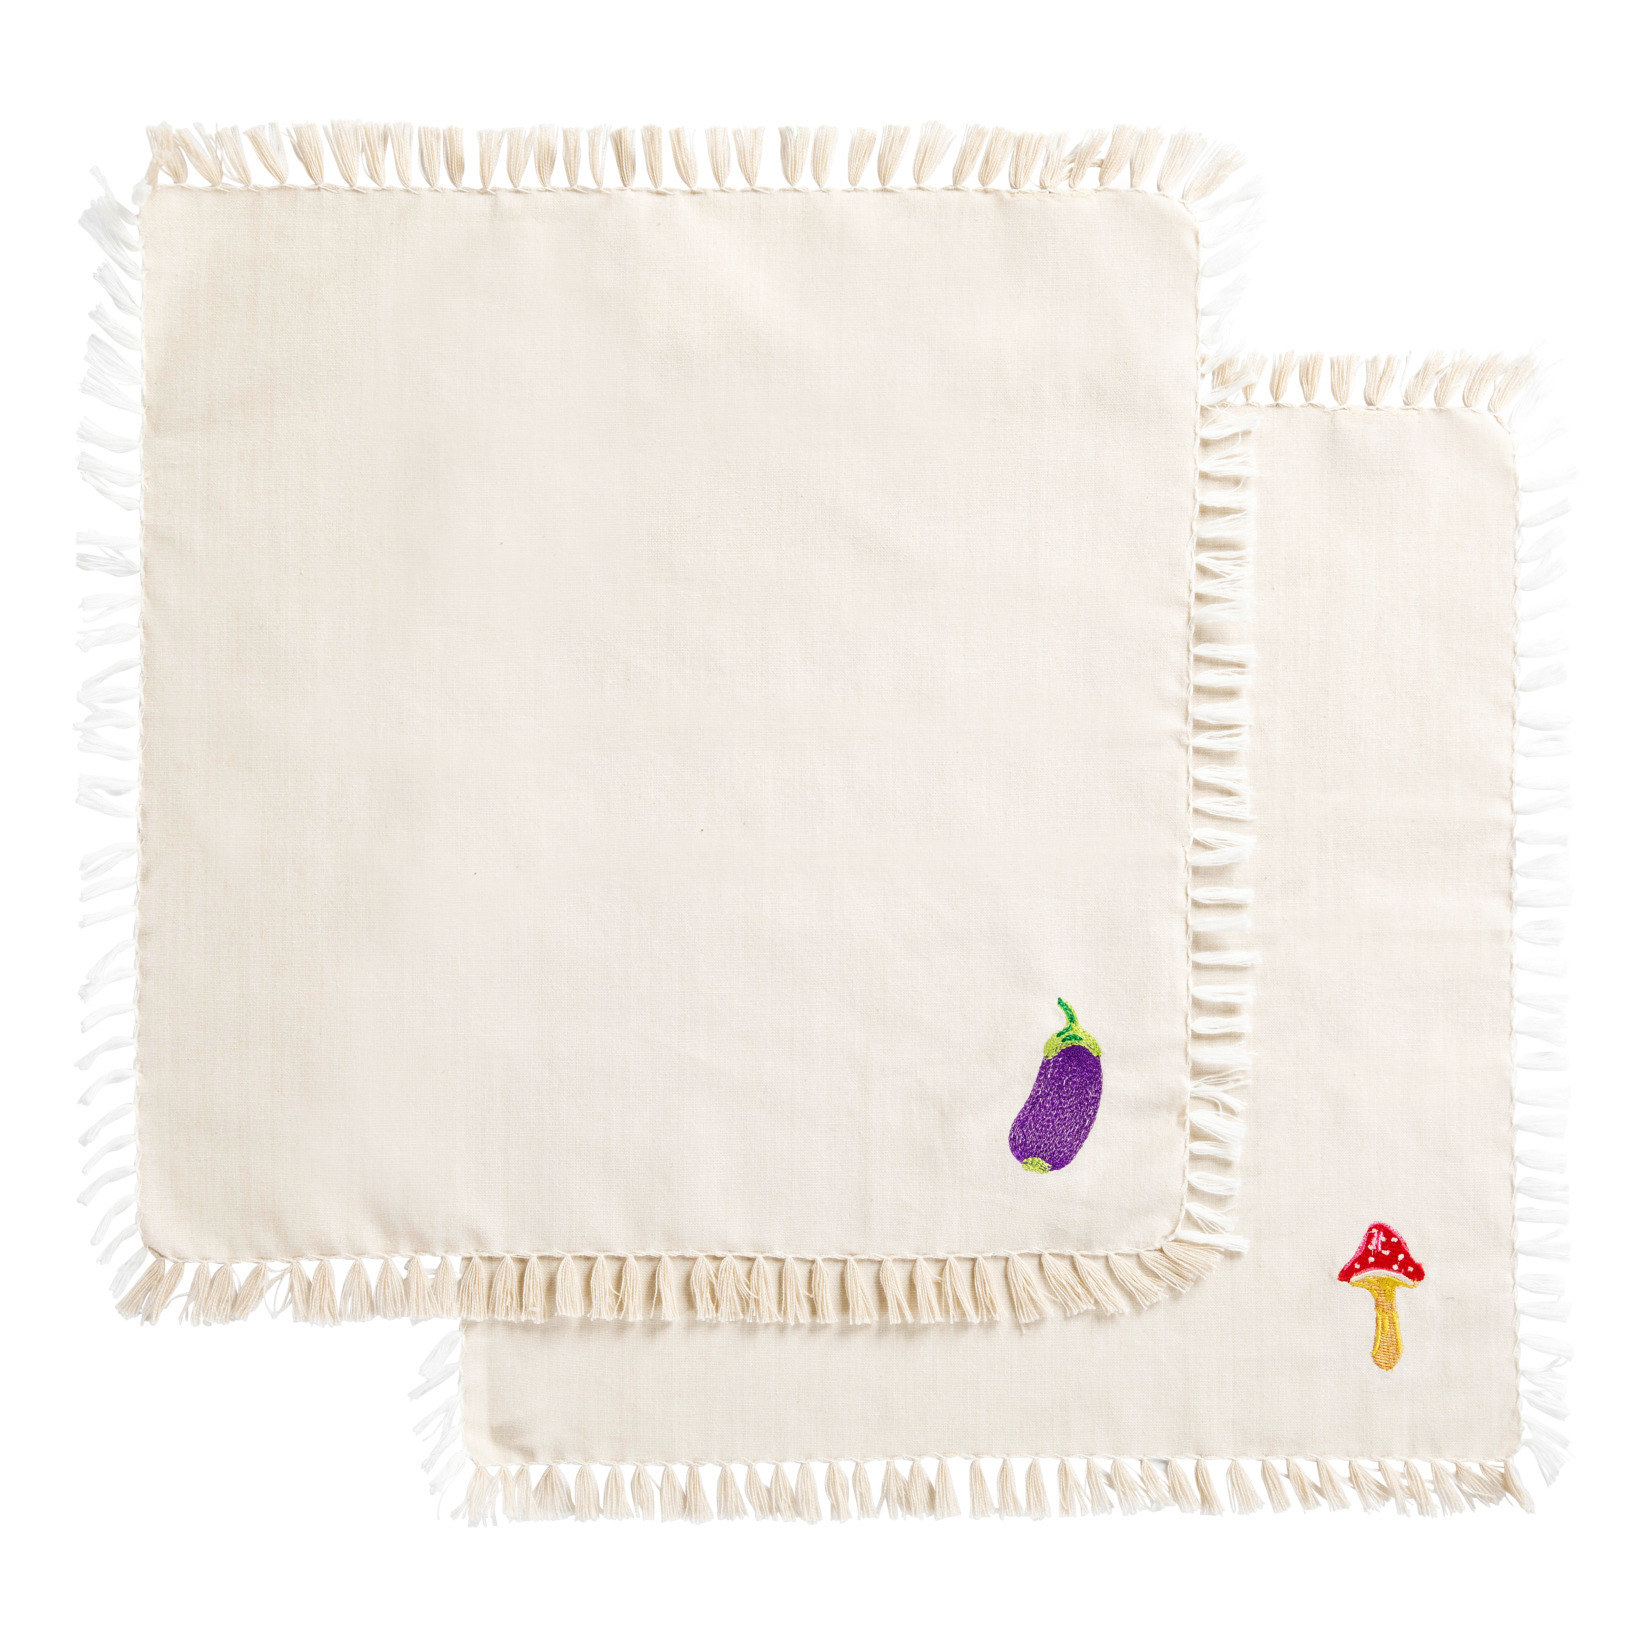 Two cloth napkins, one with a small eggplant embroidered on the corner and one with a small mushroom embroidered on the corner